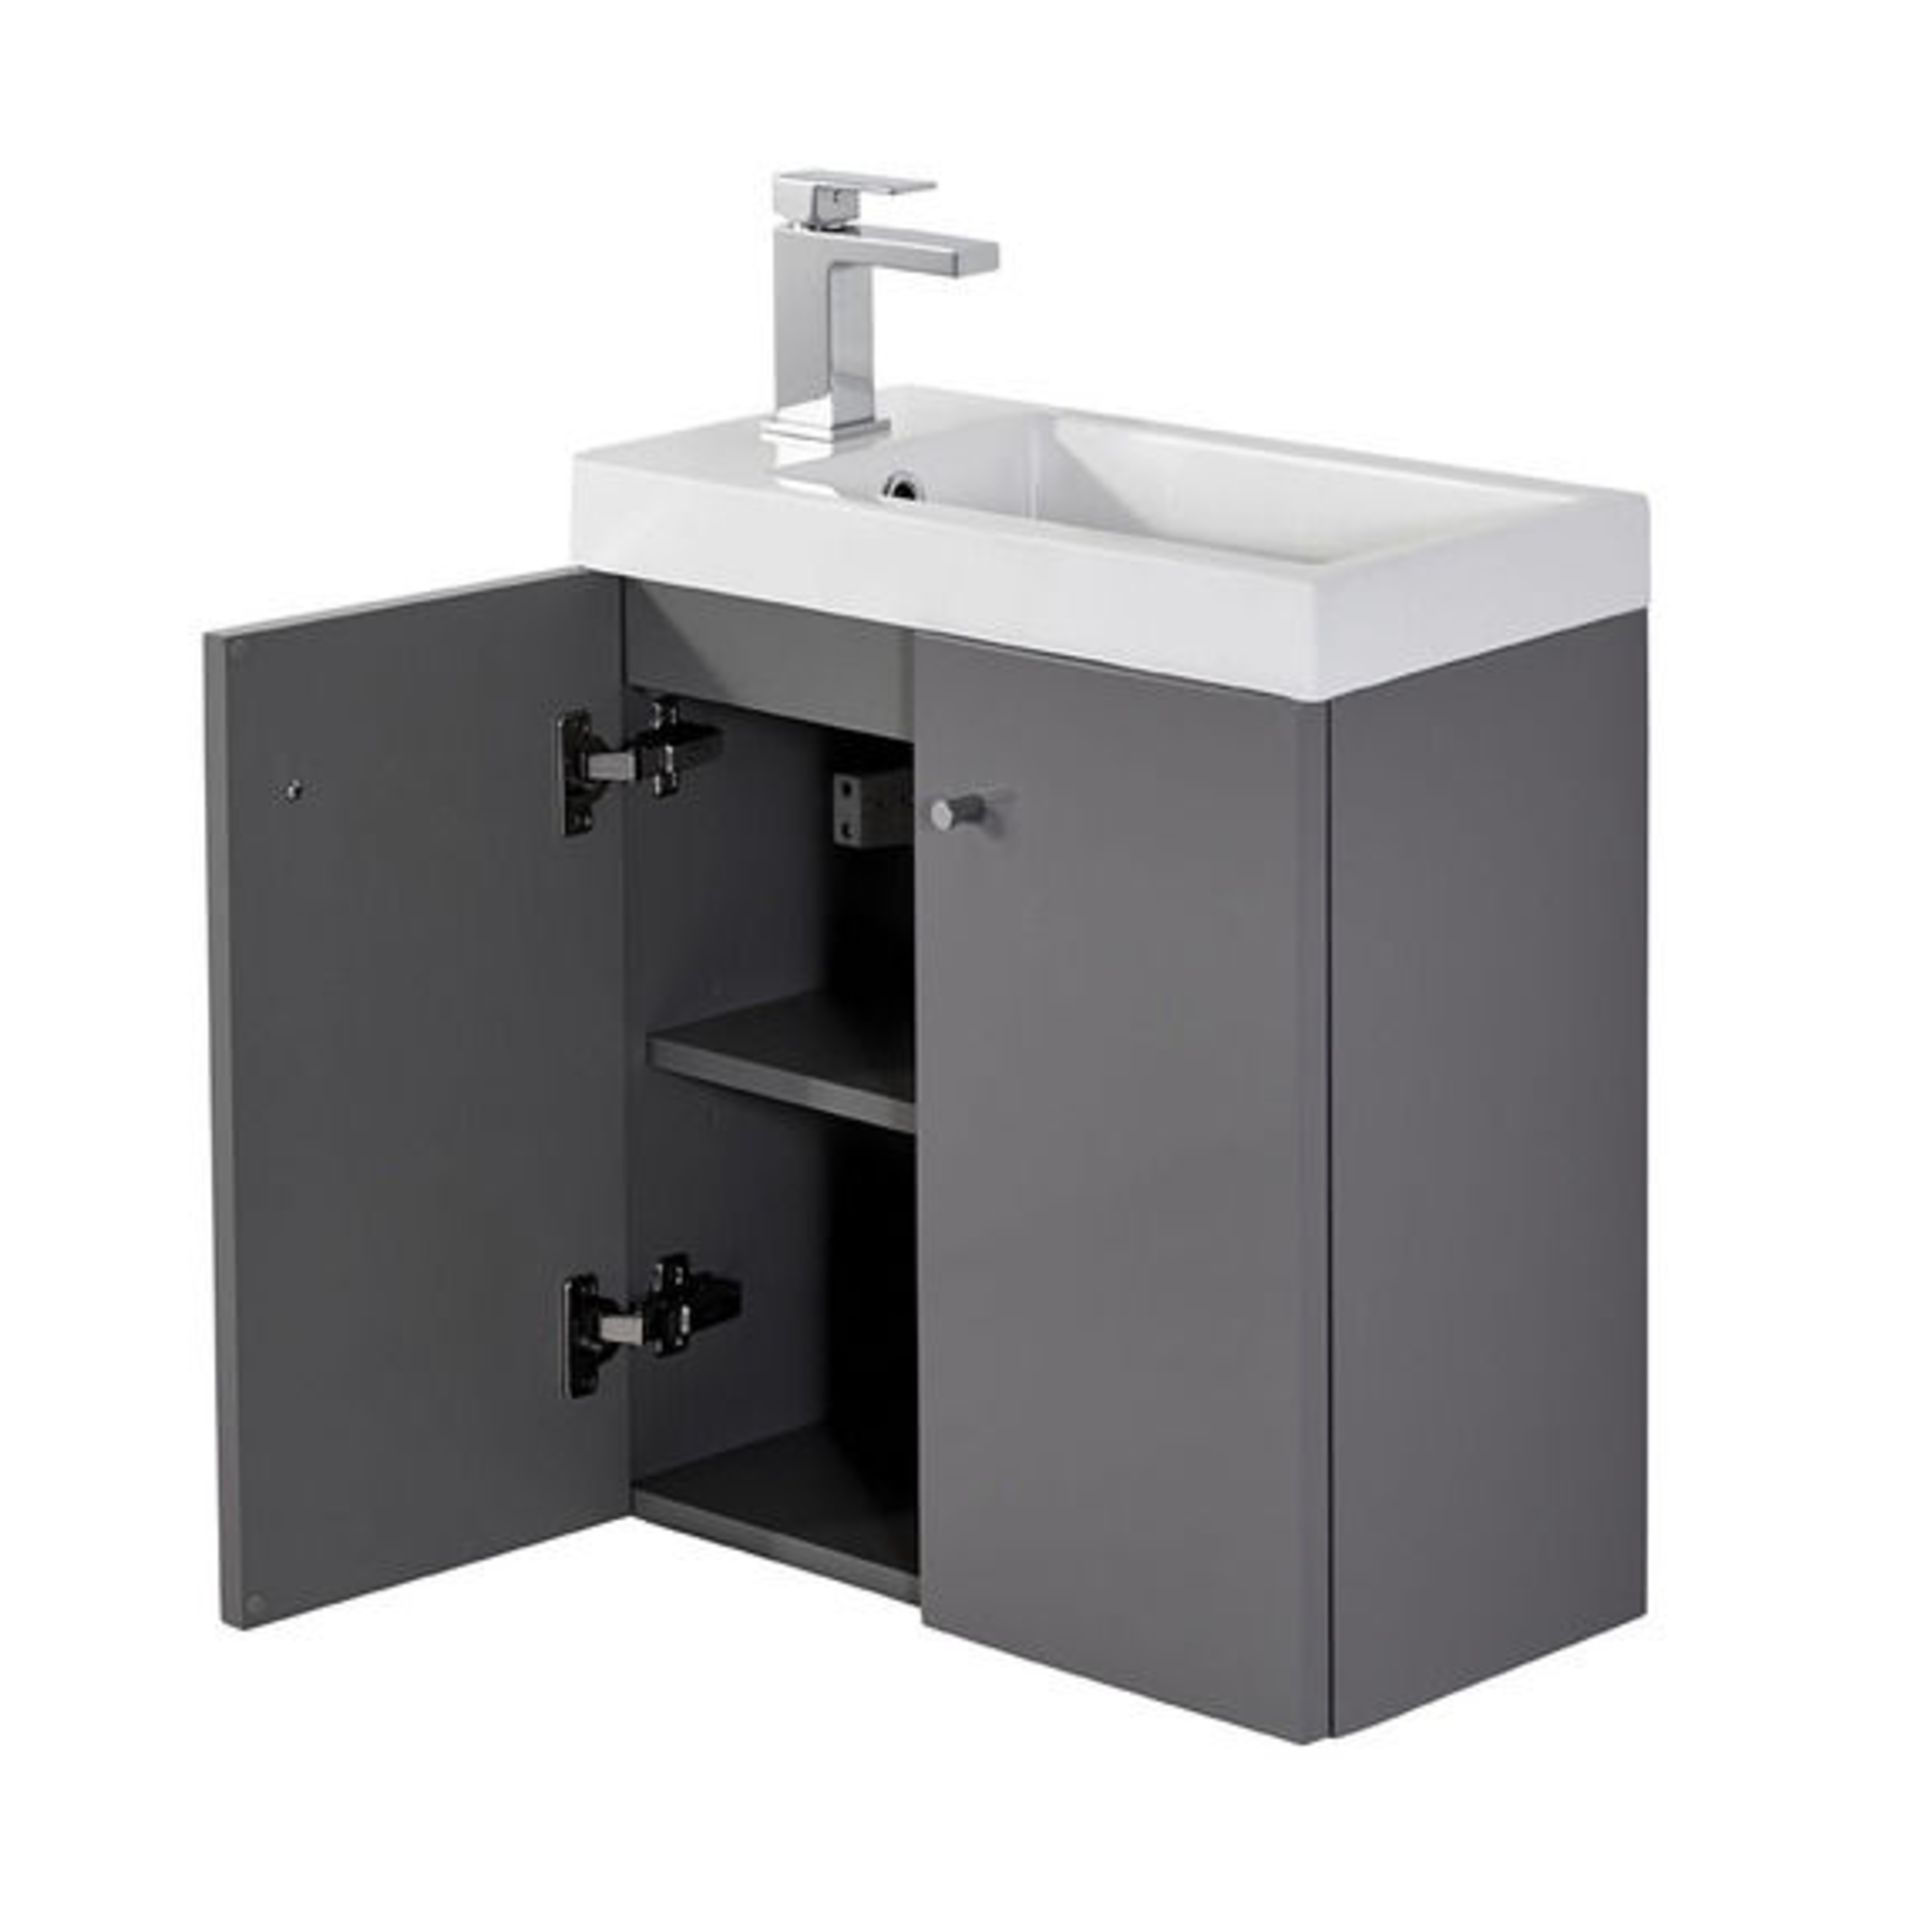 10 x Alpine Duo 495 Wall Hung Vanity Unit - Gloss Grey  - Brand New Boxed Stock - Dimensions: W49. - Image 4 of 5